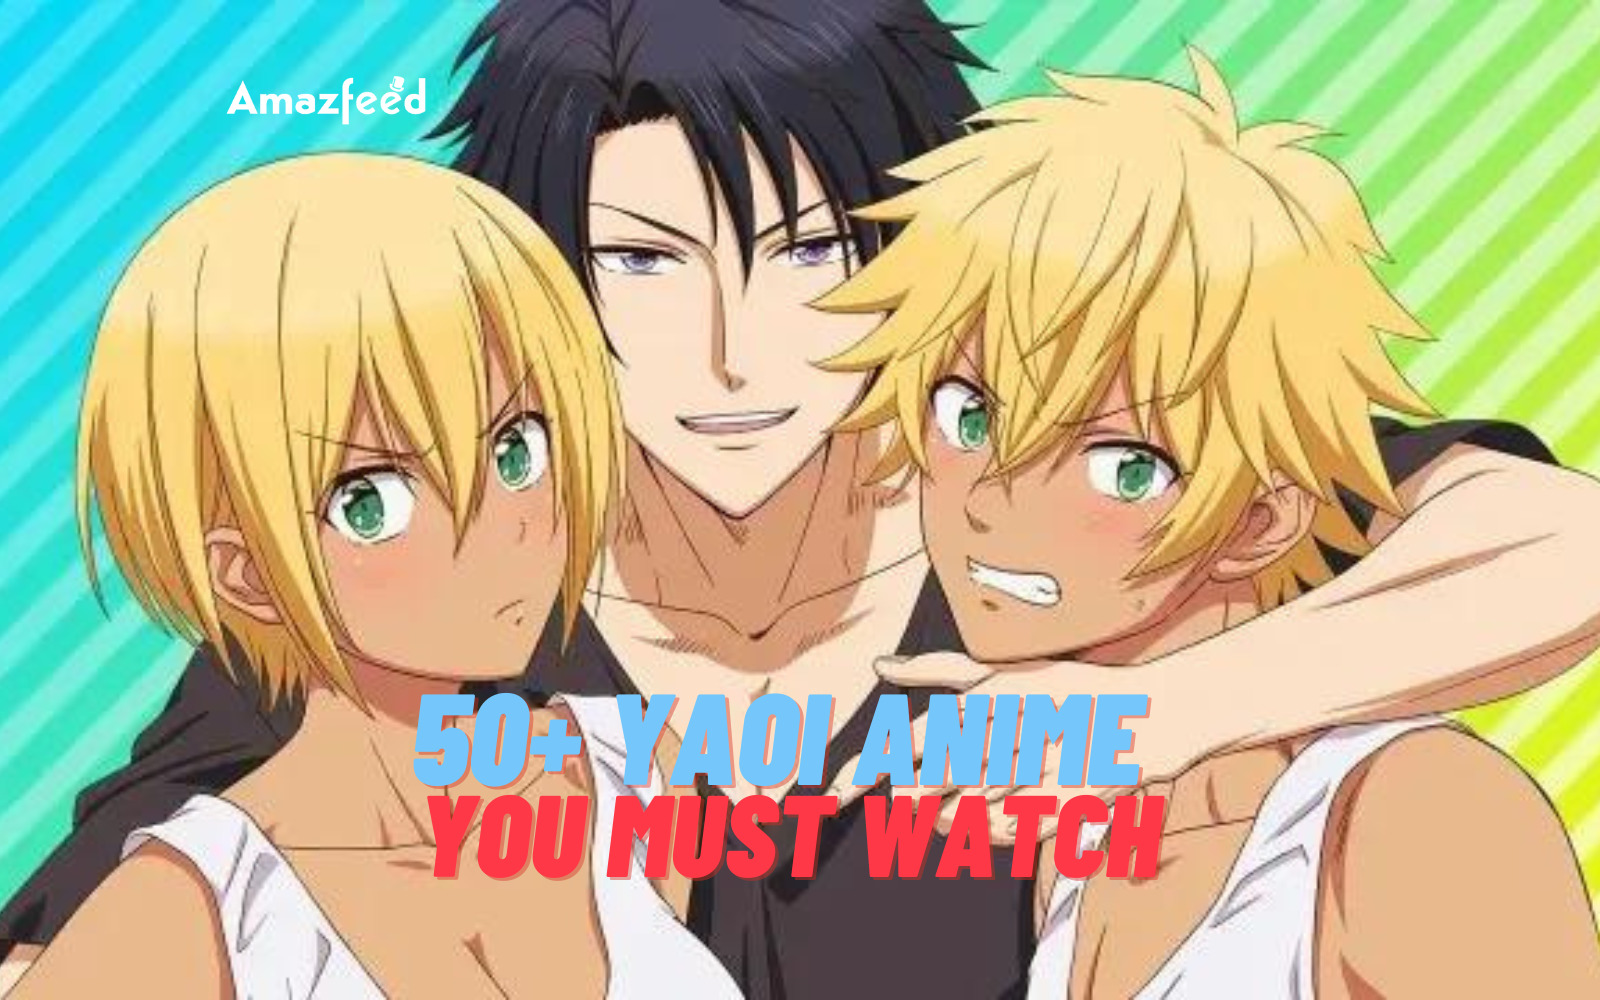 gay anime characters Archives » Amazfeed